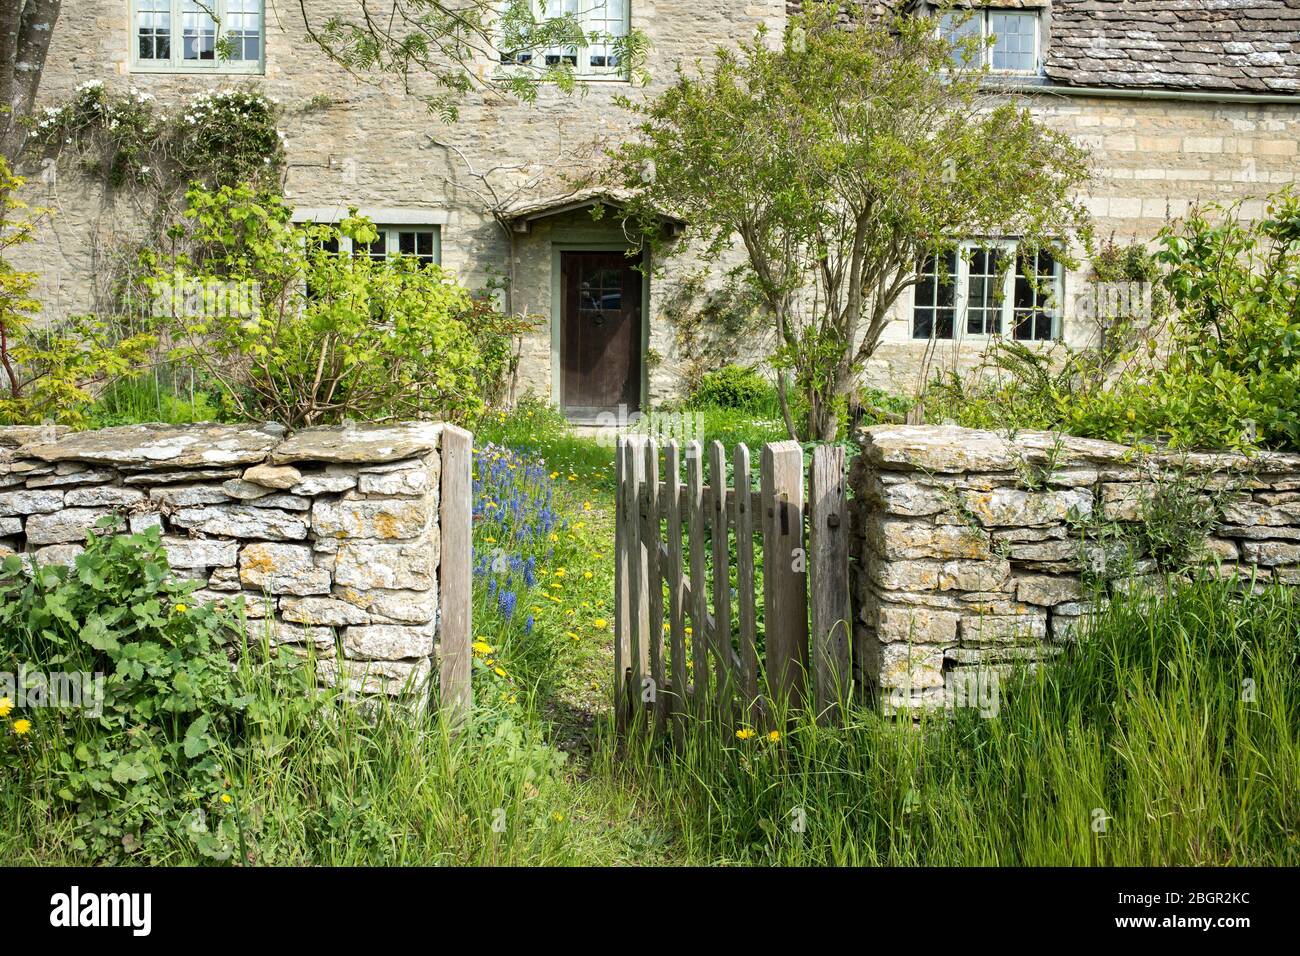 Quaint traditional country cottage in the rural village of Kelmscott in The Cotswolds, West Oxfordshire, UK Stock Photo